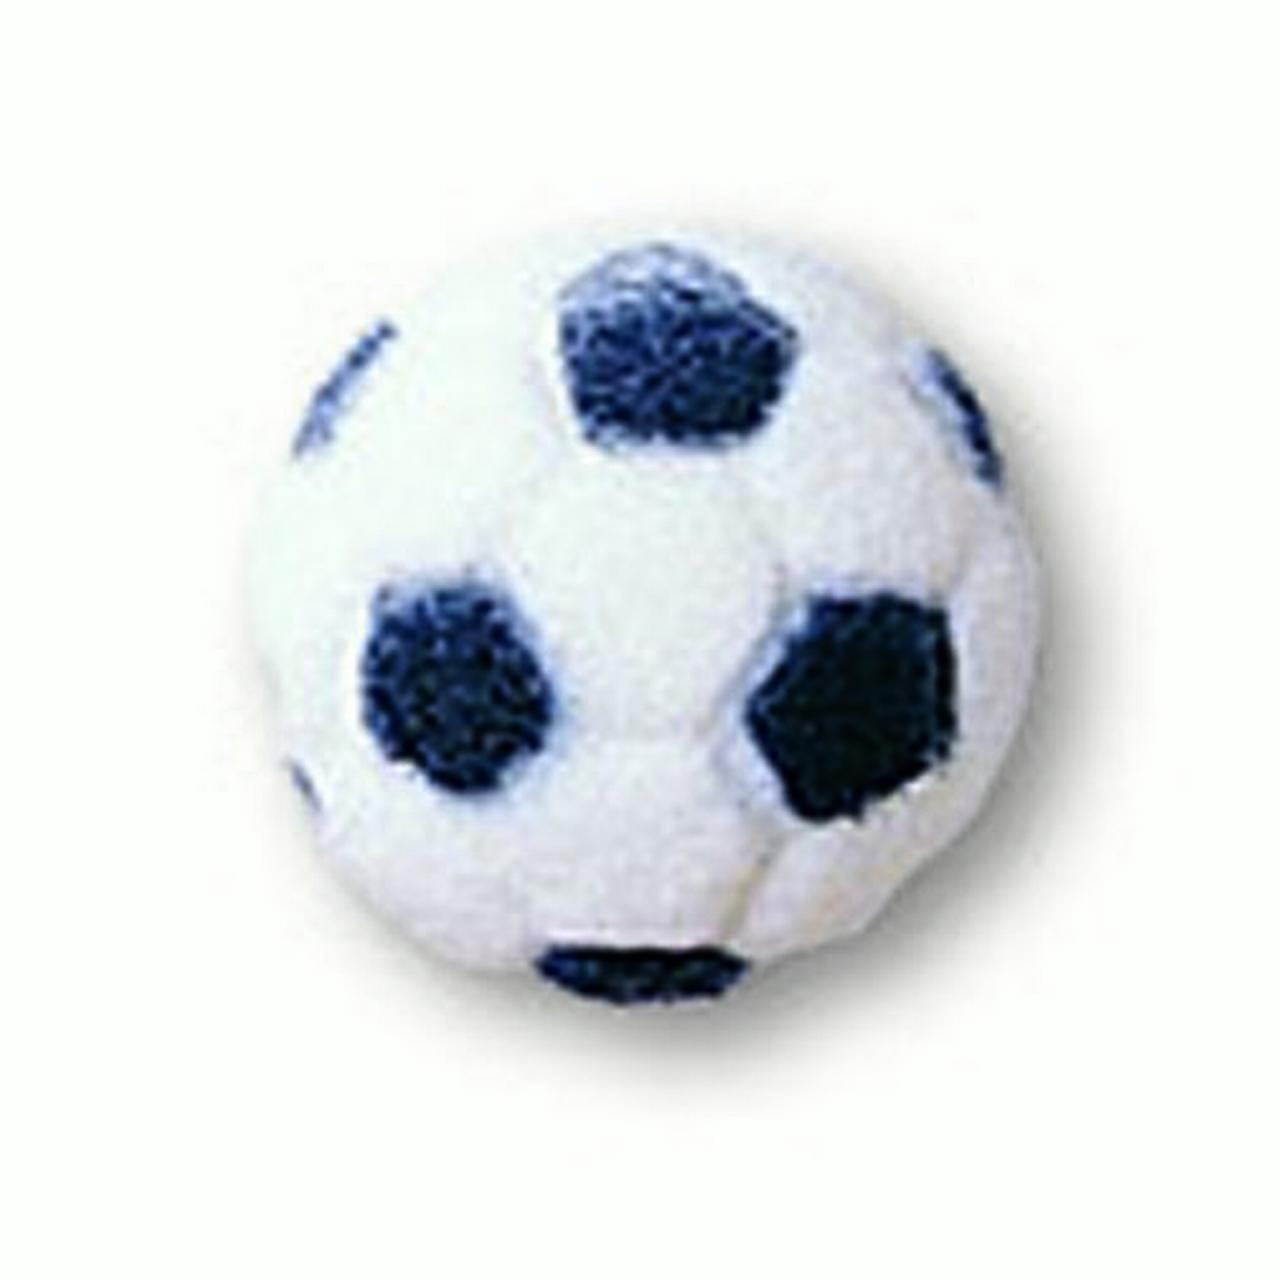 SOCCER BALLS EDIBLE CUP CAKE TOPPERS x 12-5CM WIDE. 